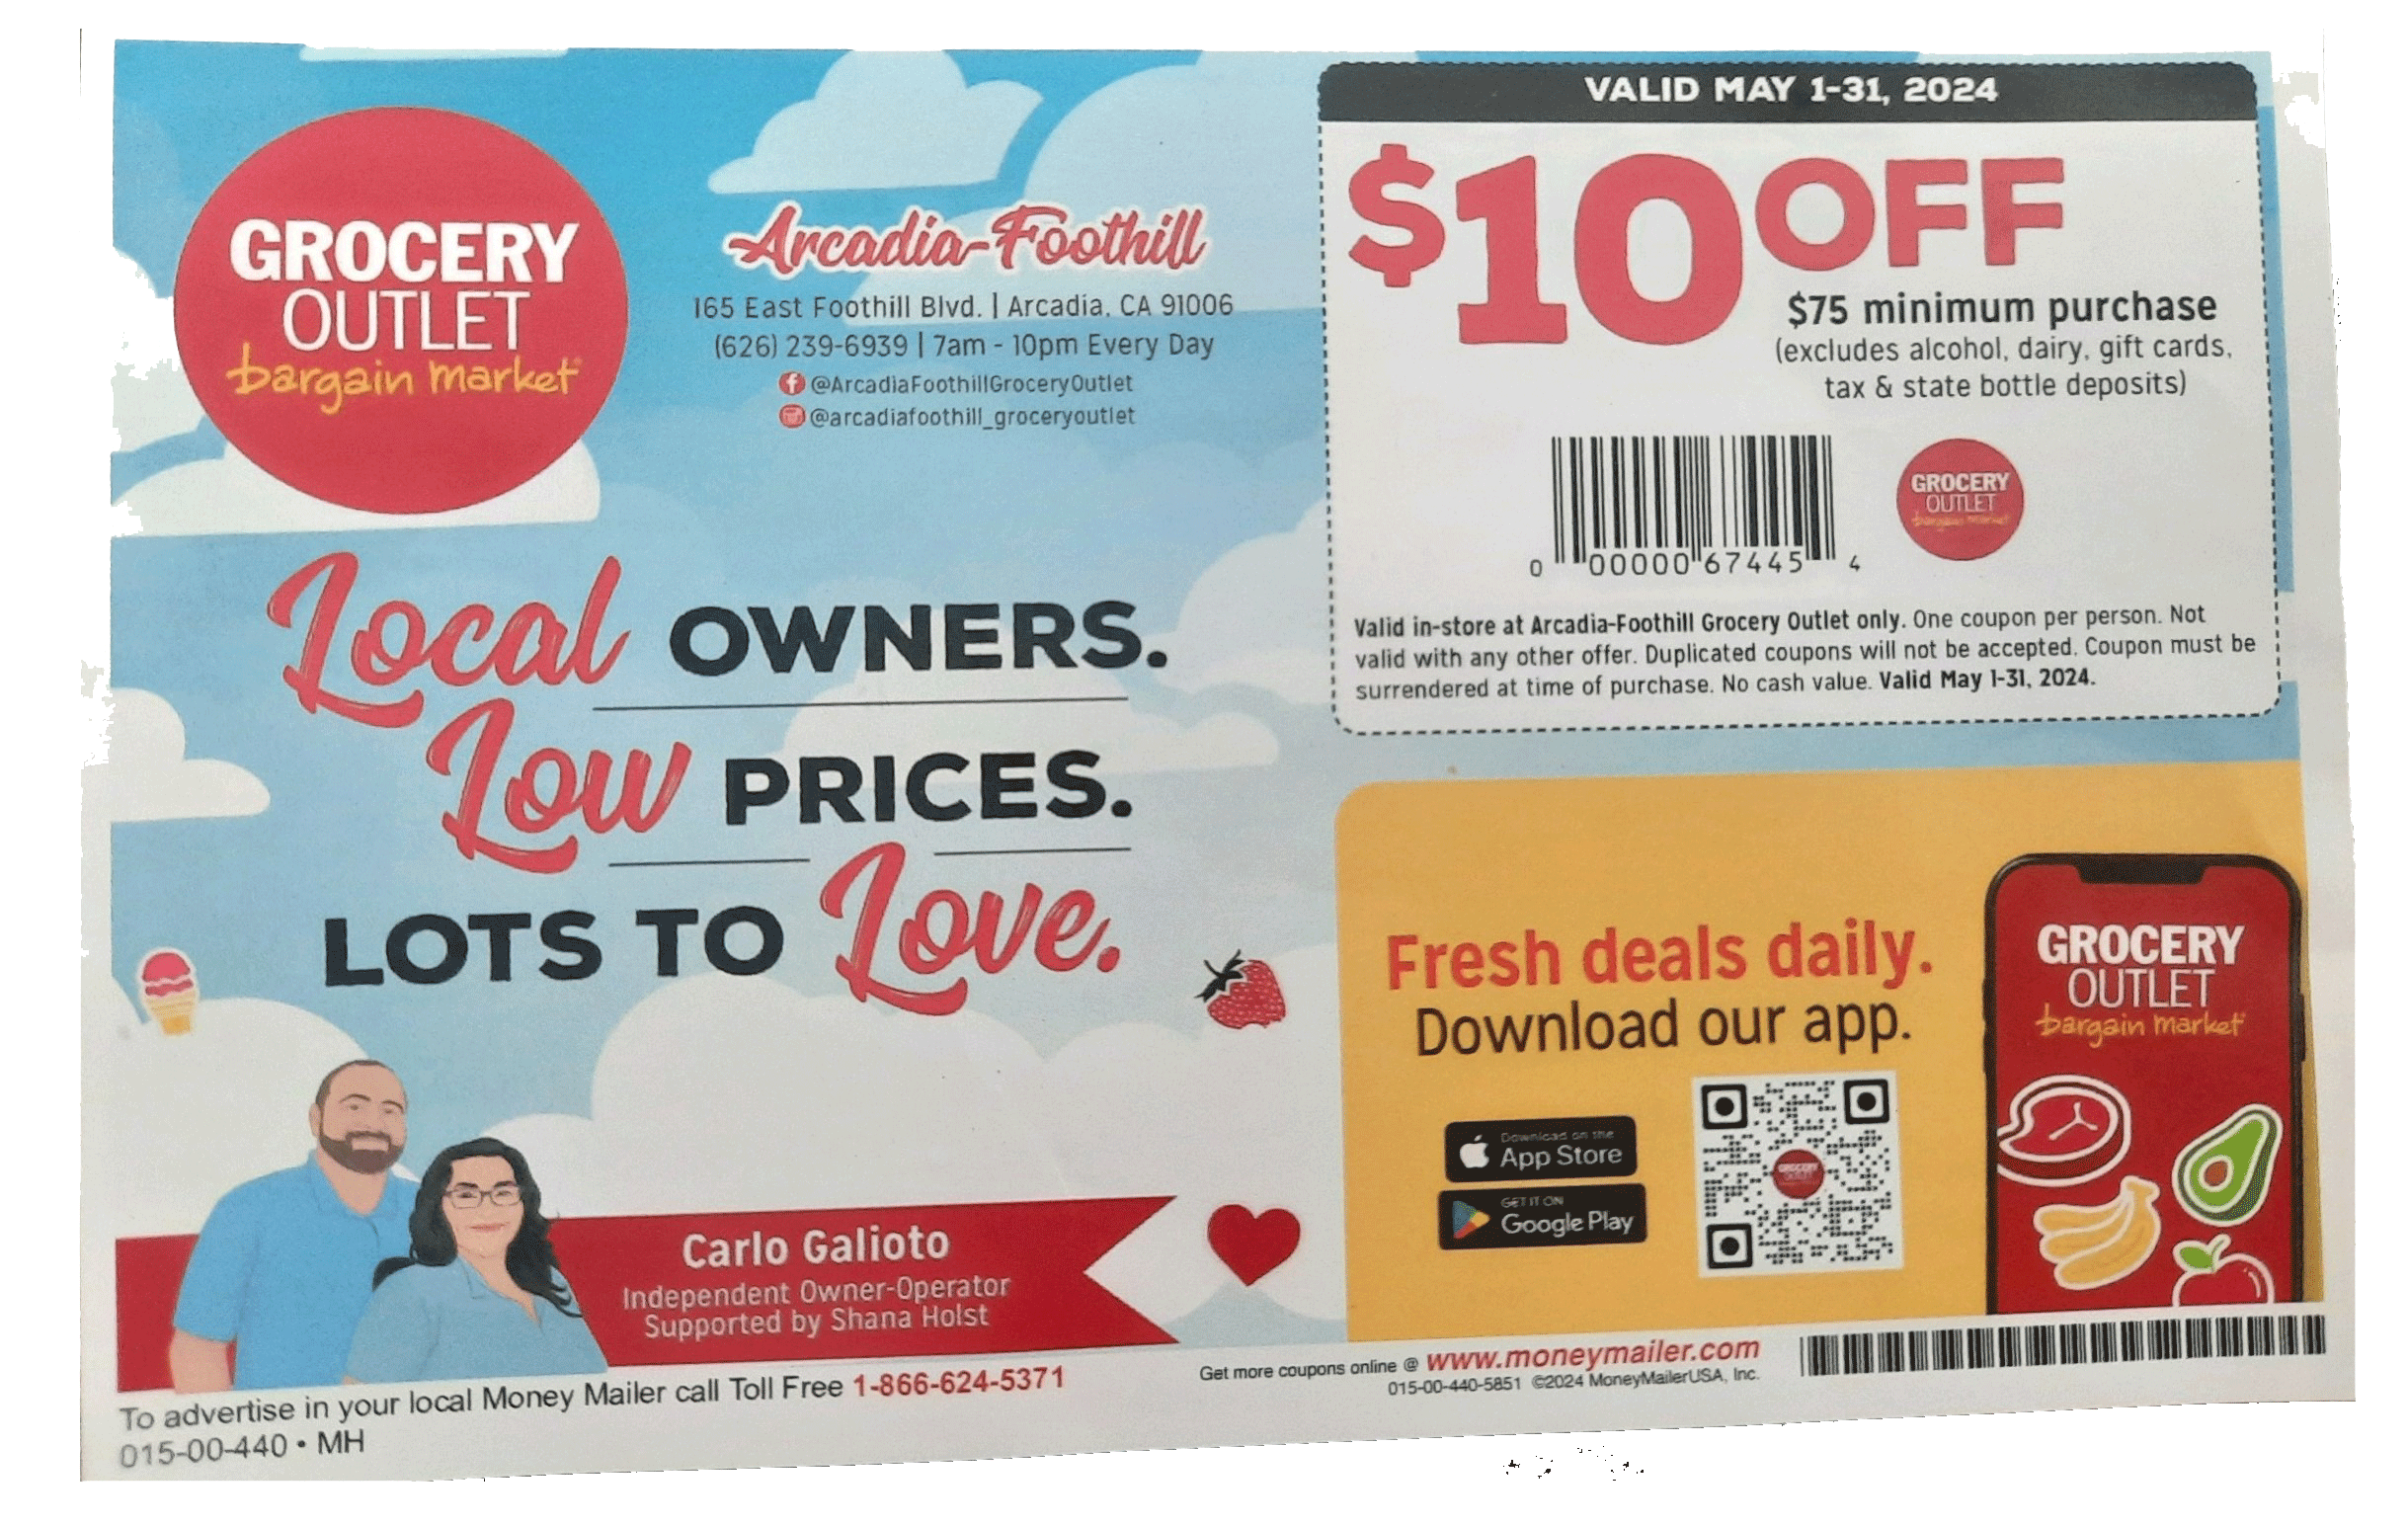 Grocery Outlet local specials